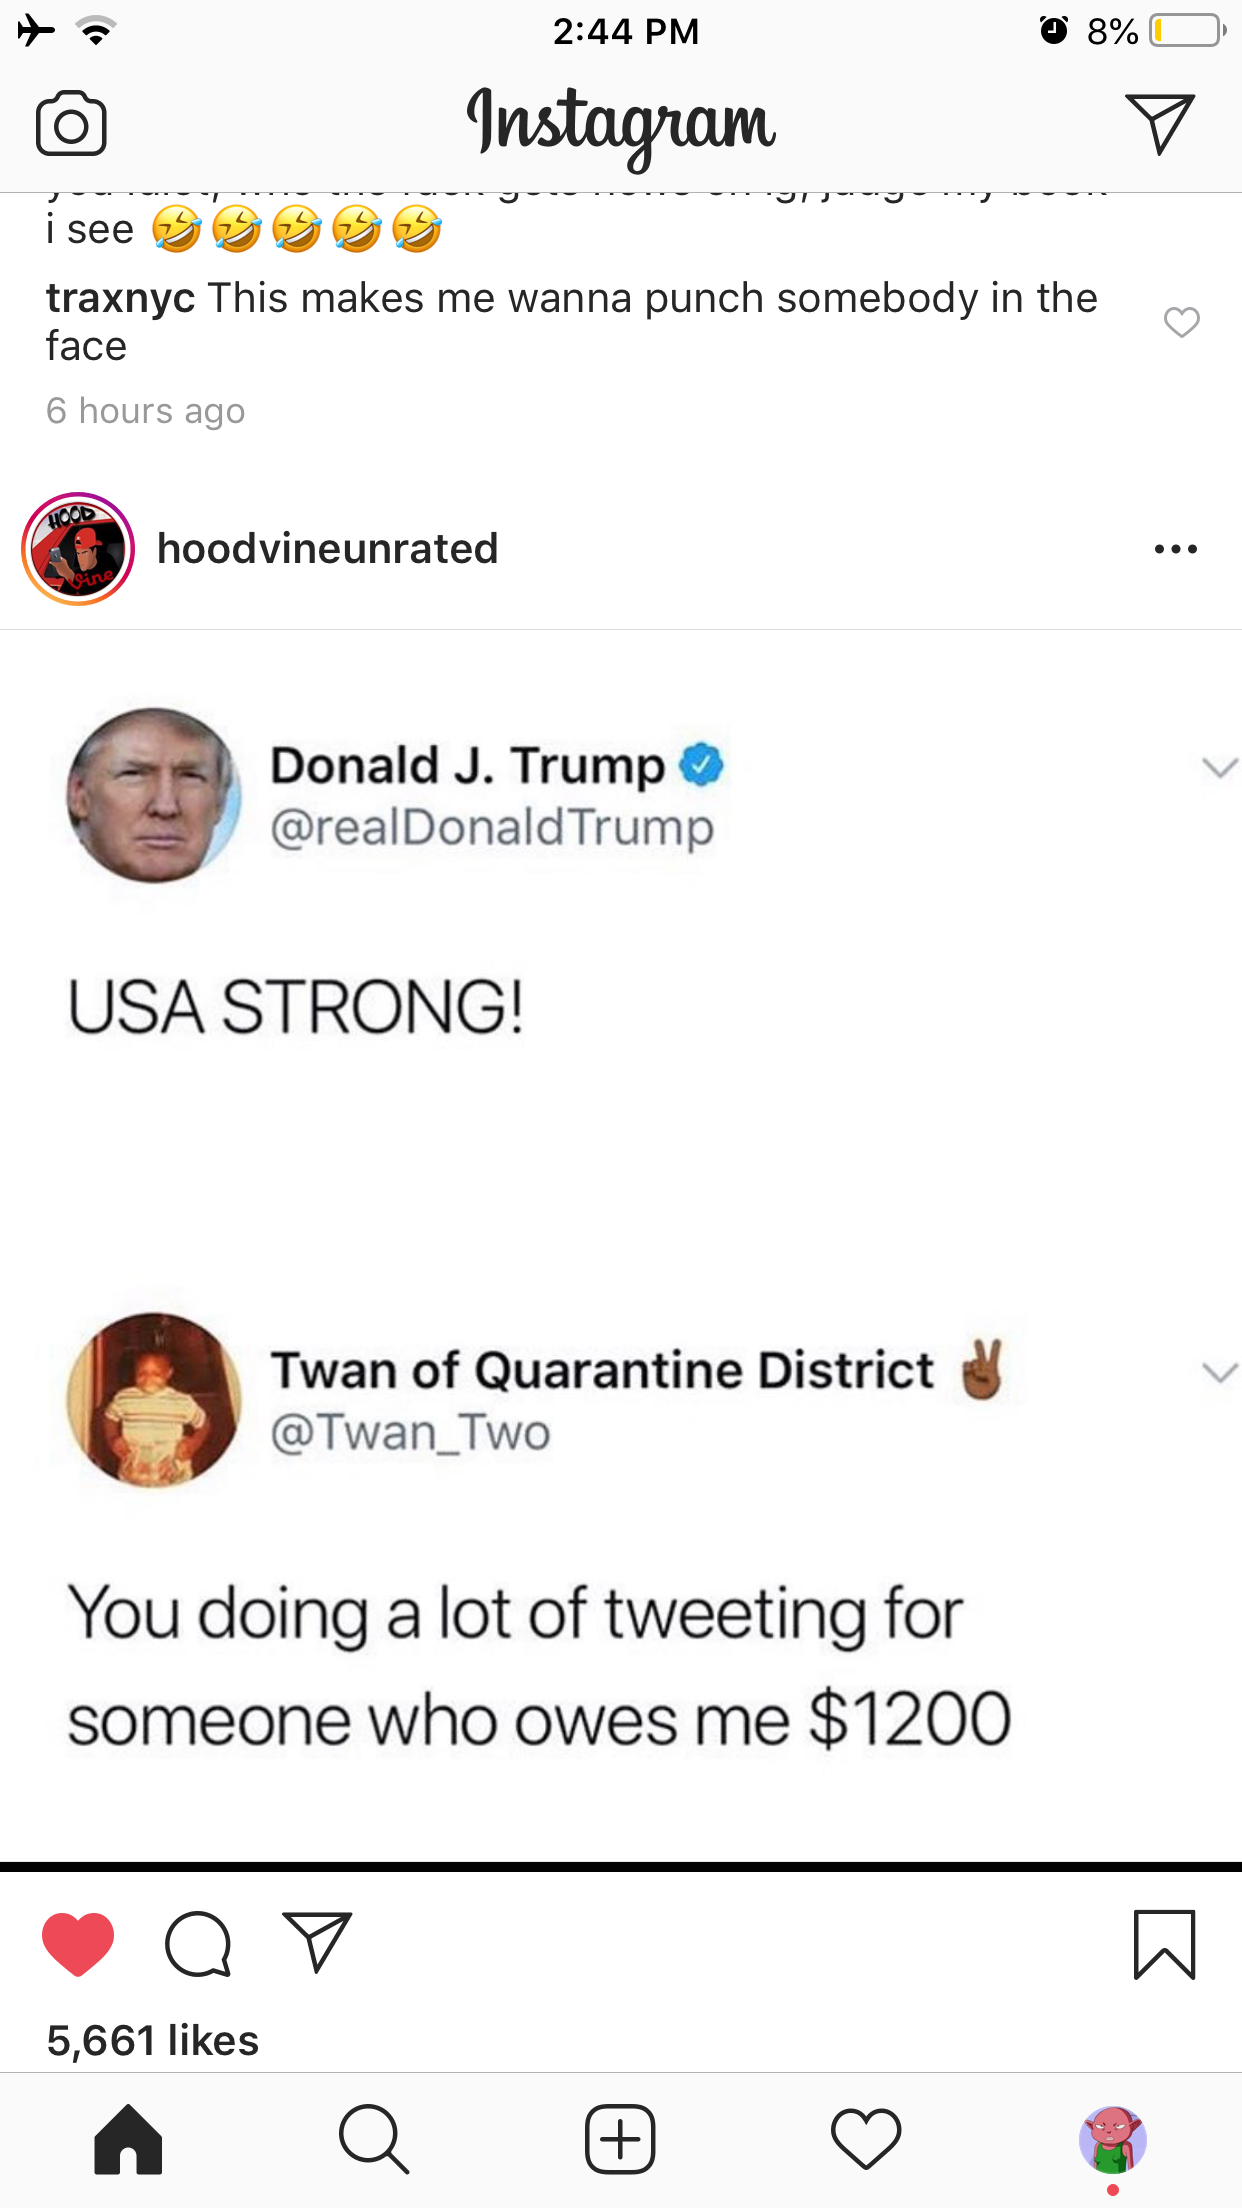 screenshot - 8% Instagram i see traxnyc This makes me wanna punch somebody in the face hours ago hoodvineunrated Donald J. Trump Trump Usa Strong! Twan of Quarantine District You doing a lot of tweeting for someone who owes me $1200 5,661